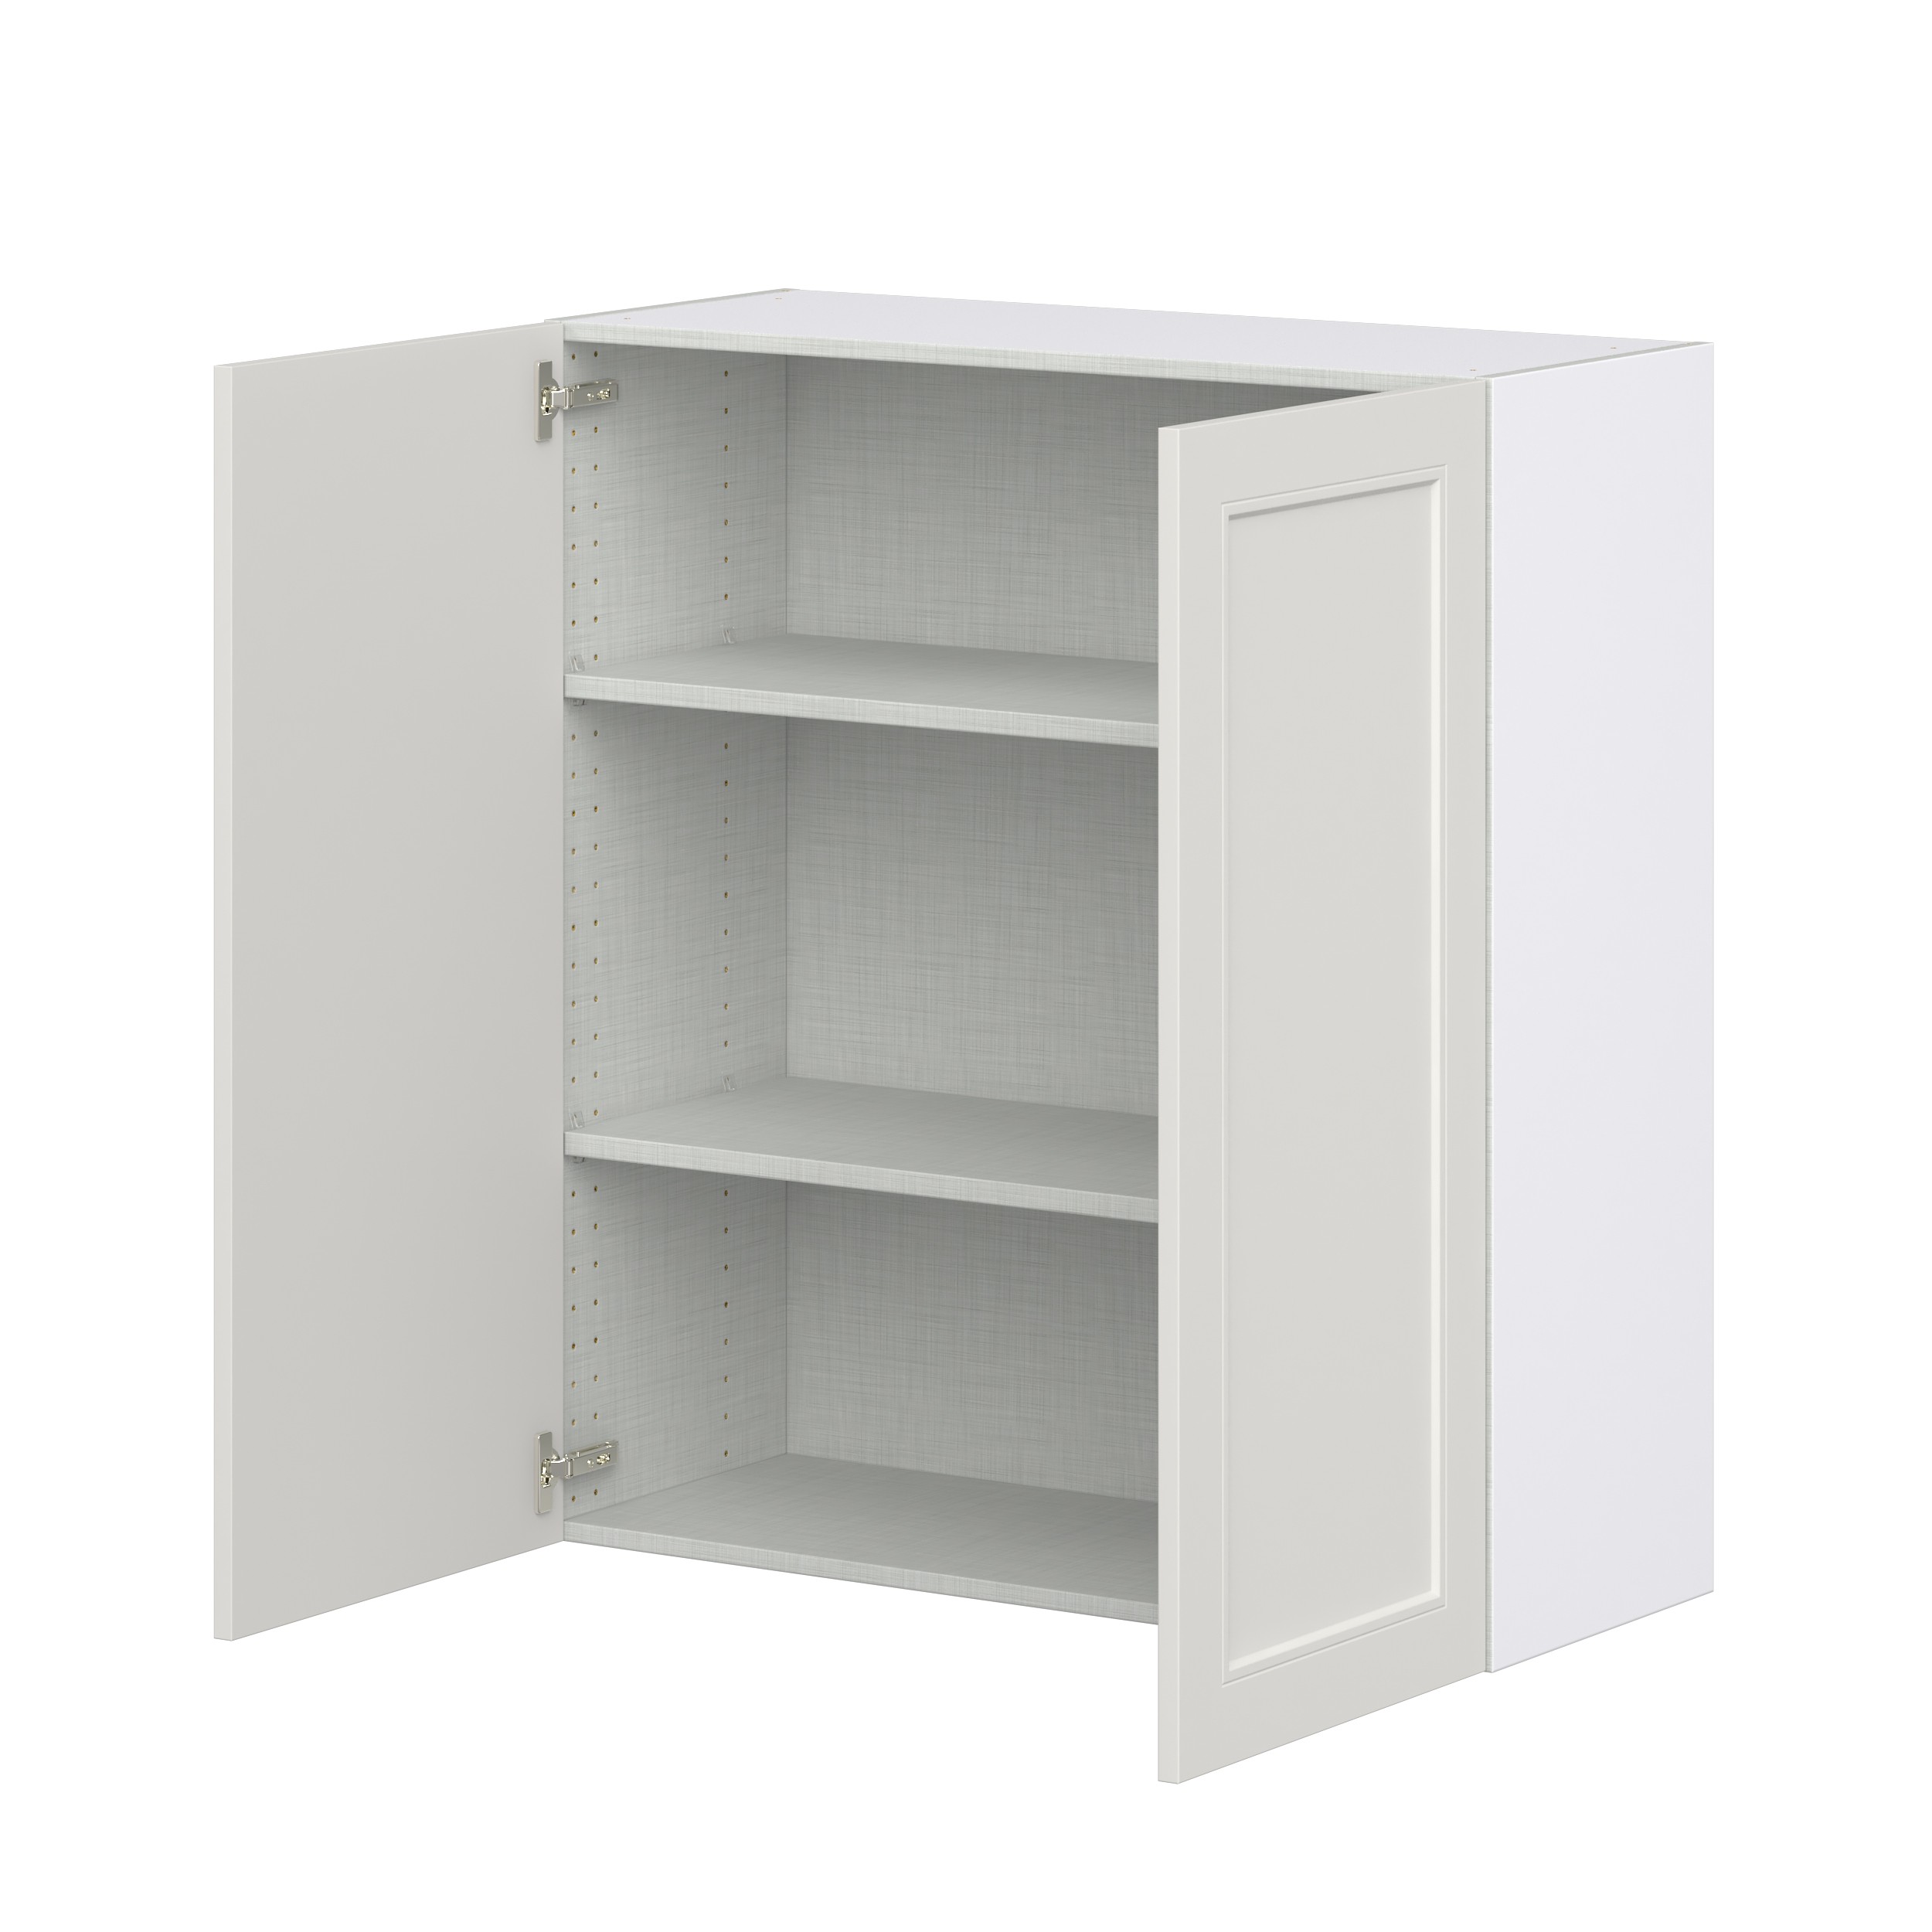 Wisteria Painted Light Gray Recessed Assembled Wall Cabinet with 2 Full High Doors (36 in. W x 40 in. H x 14 in. D)